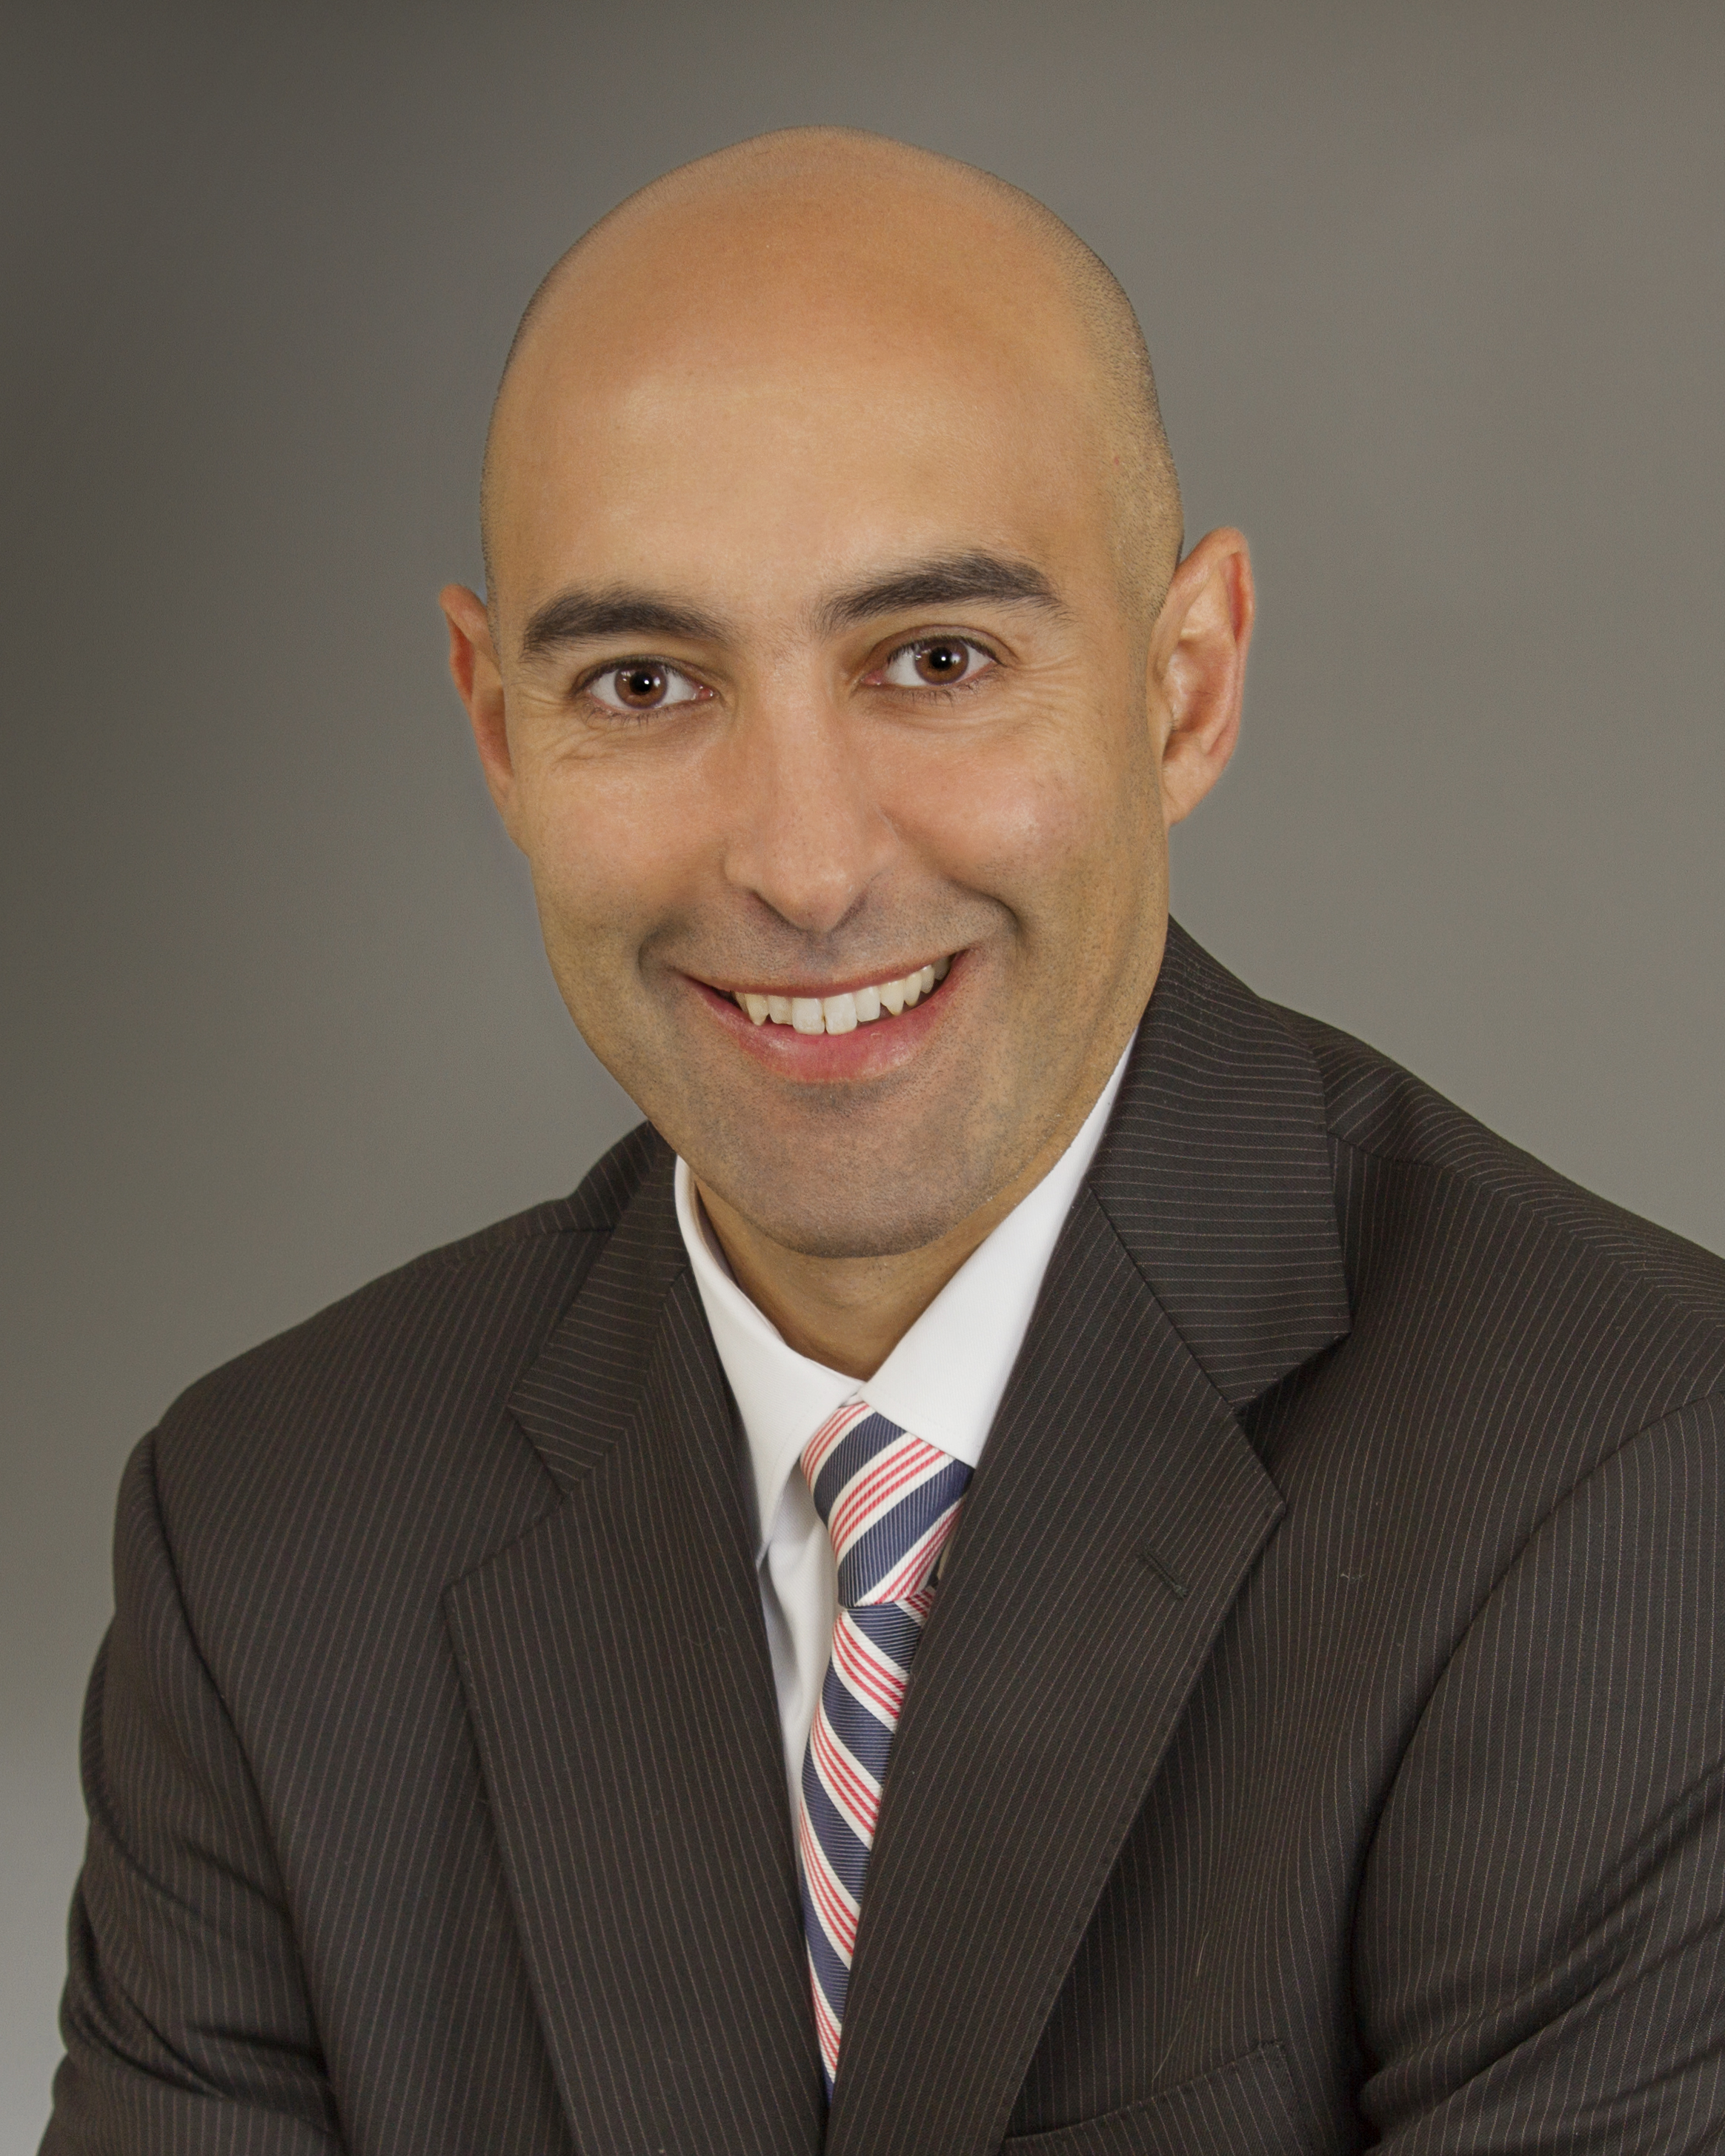 Freddie Mac has announced that Sam Khater, a prominent housing and economics expert with more than 20 years of experience, is joining the company as Vice President and Chief Economist